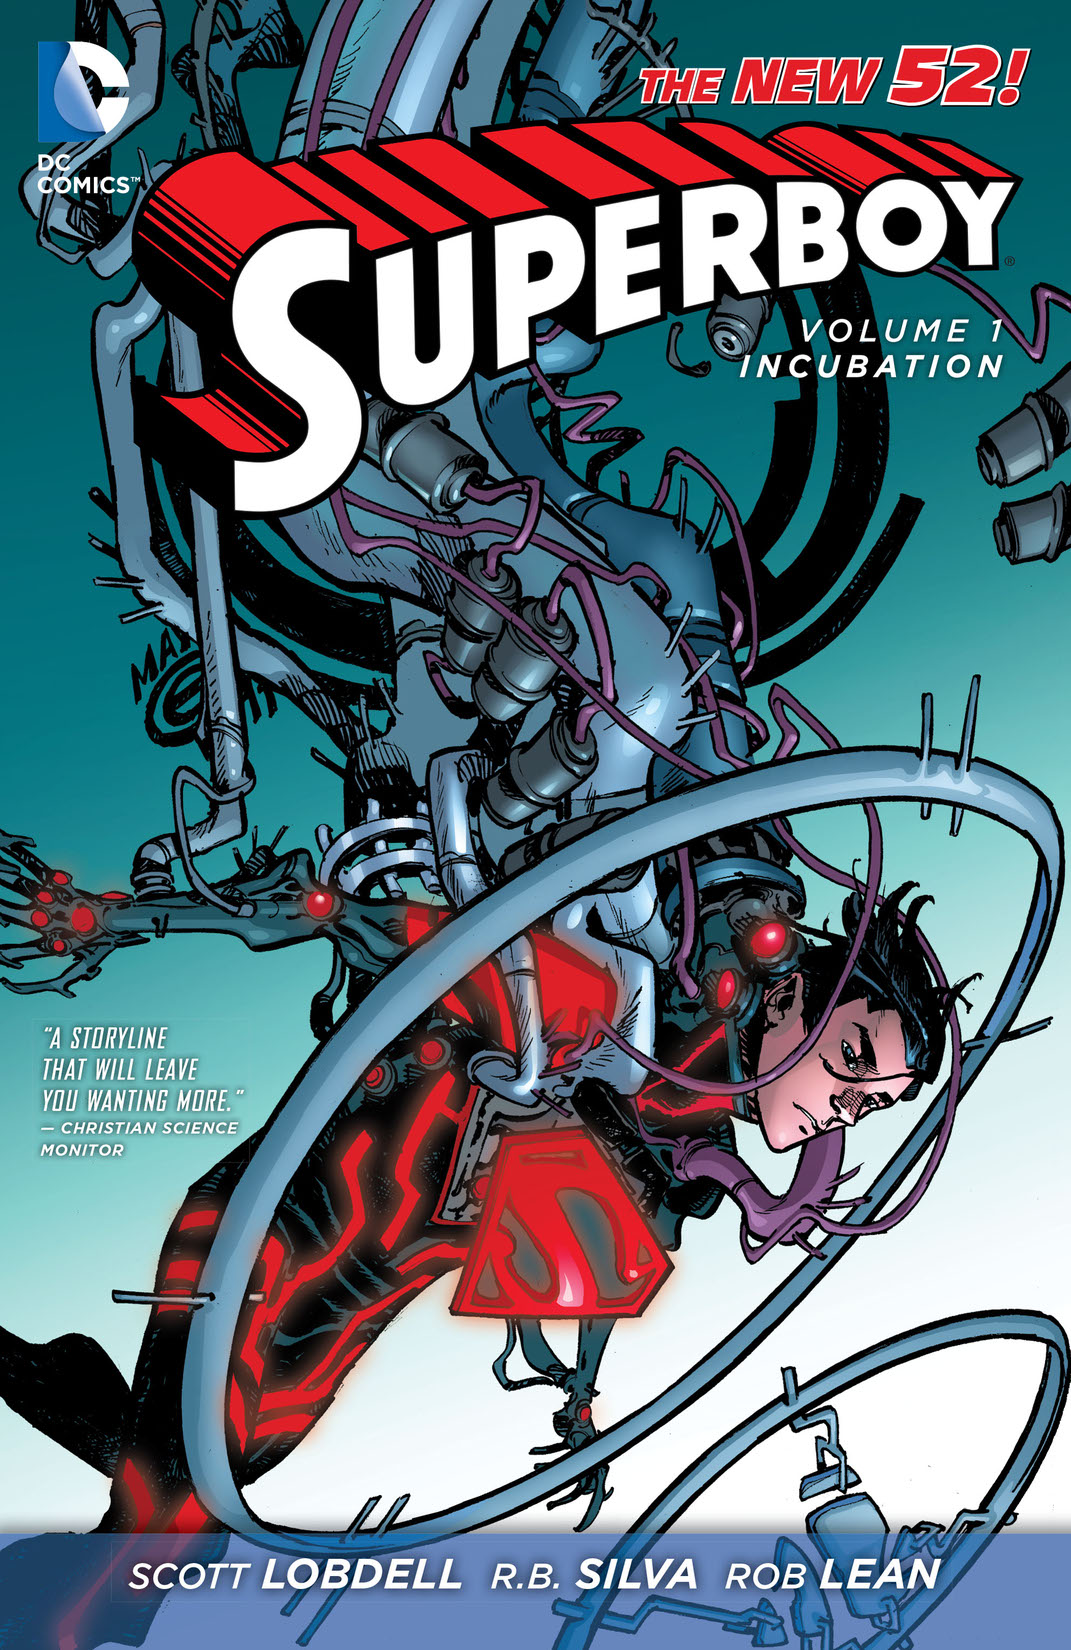 Superboy Vol. 1: Incubation preview images